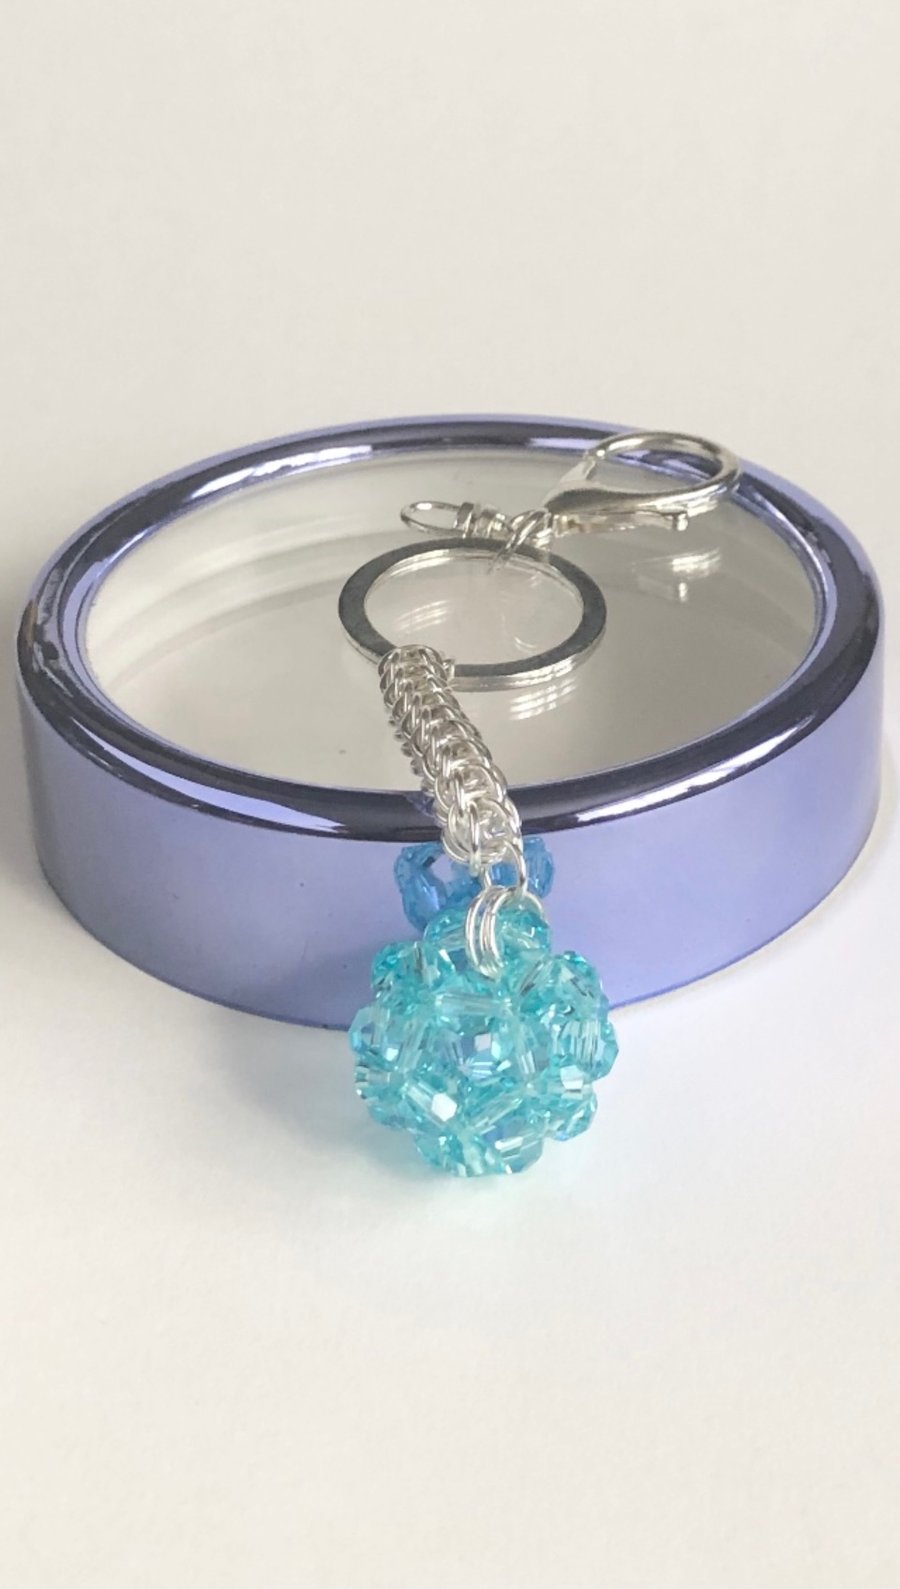 Handbag Charm, Turquoise Crystal with a Chainmaille Chain and Keyring - Last One